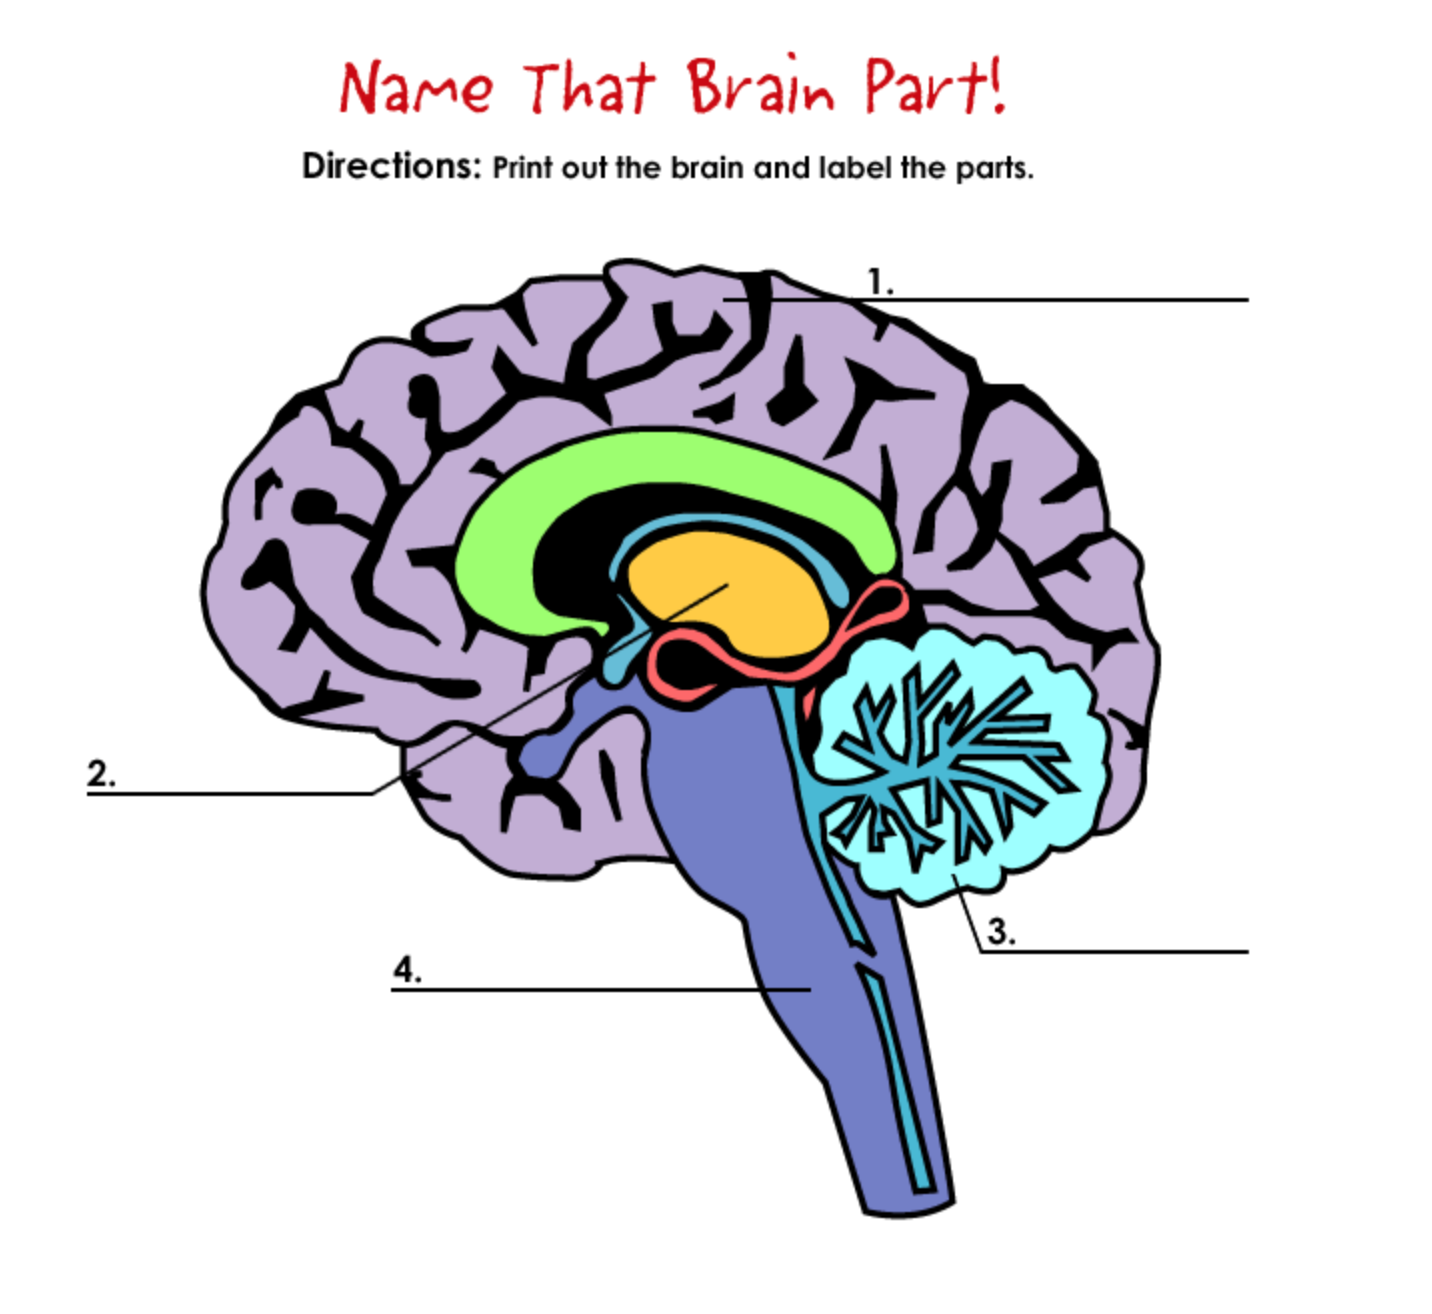 Brain capabilities. Parts of the Brain. Human Brain Parts. Name the Parts of the Human Brain. Brain Parts and functions.